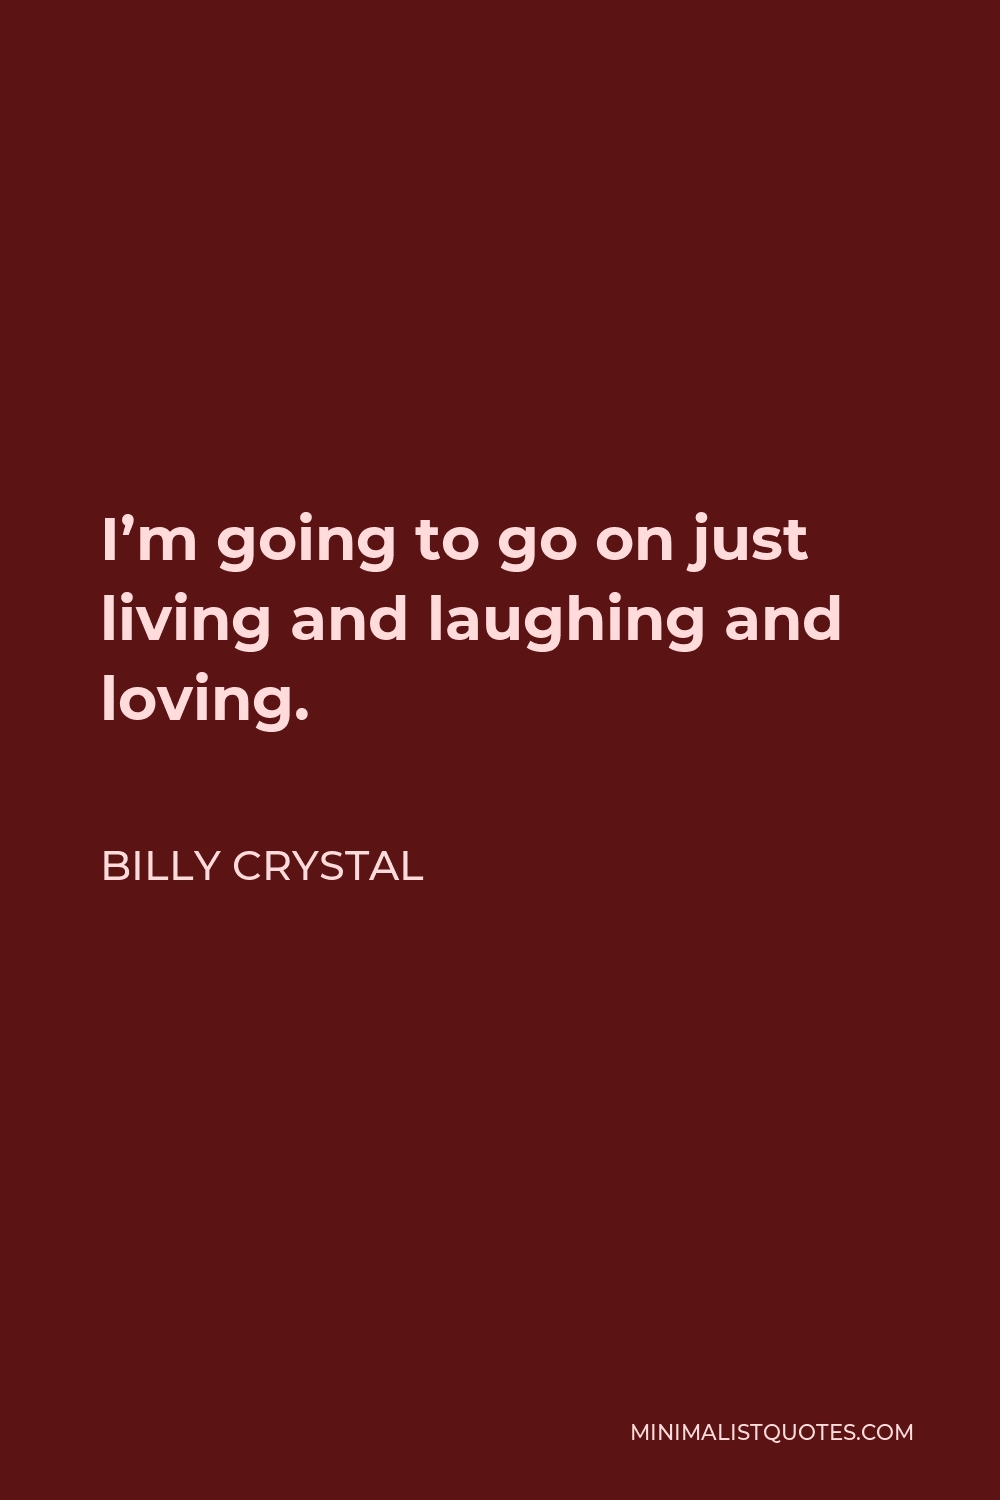 Billy Crystal Quote - I’m going to go on just living and laughing and loving.